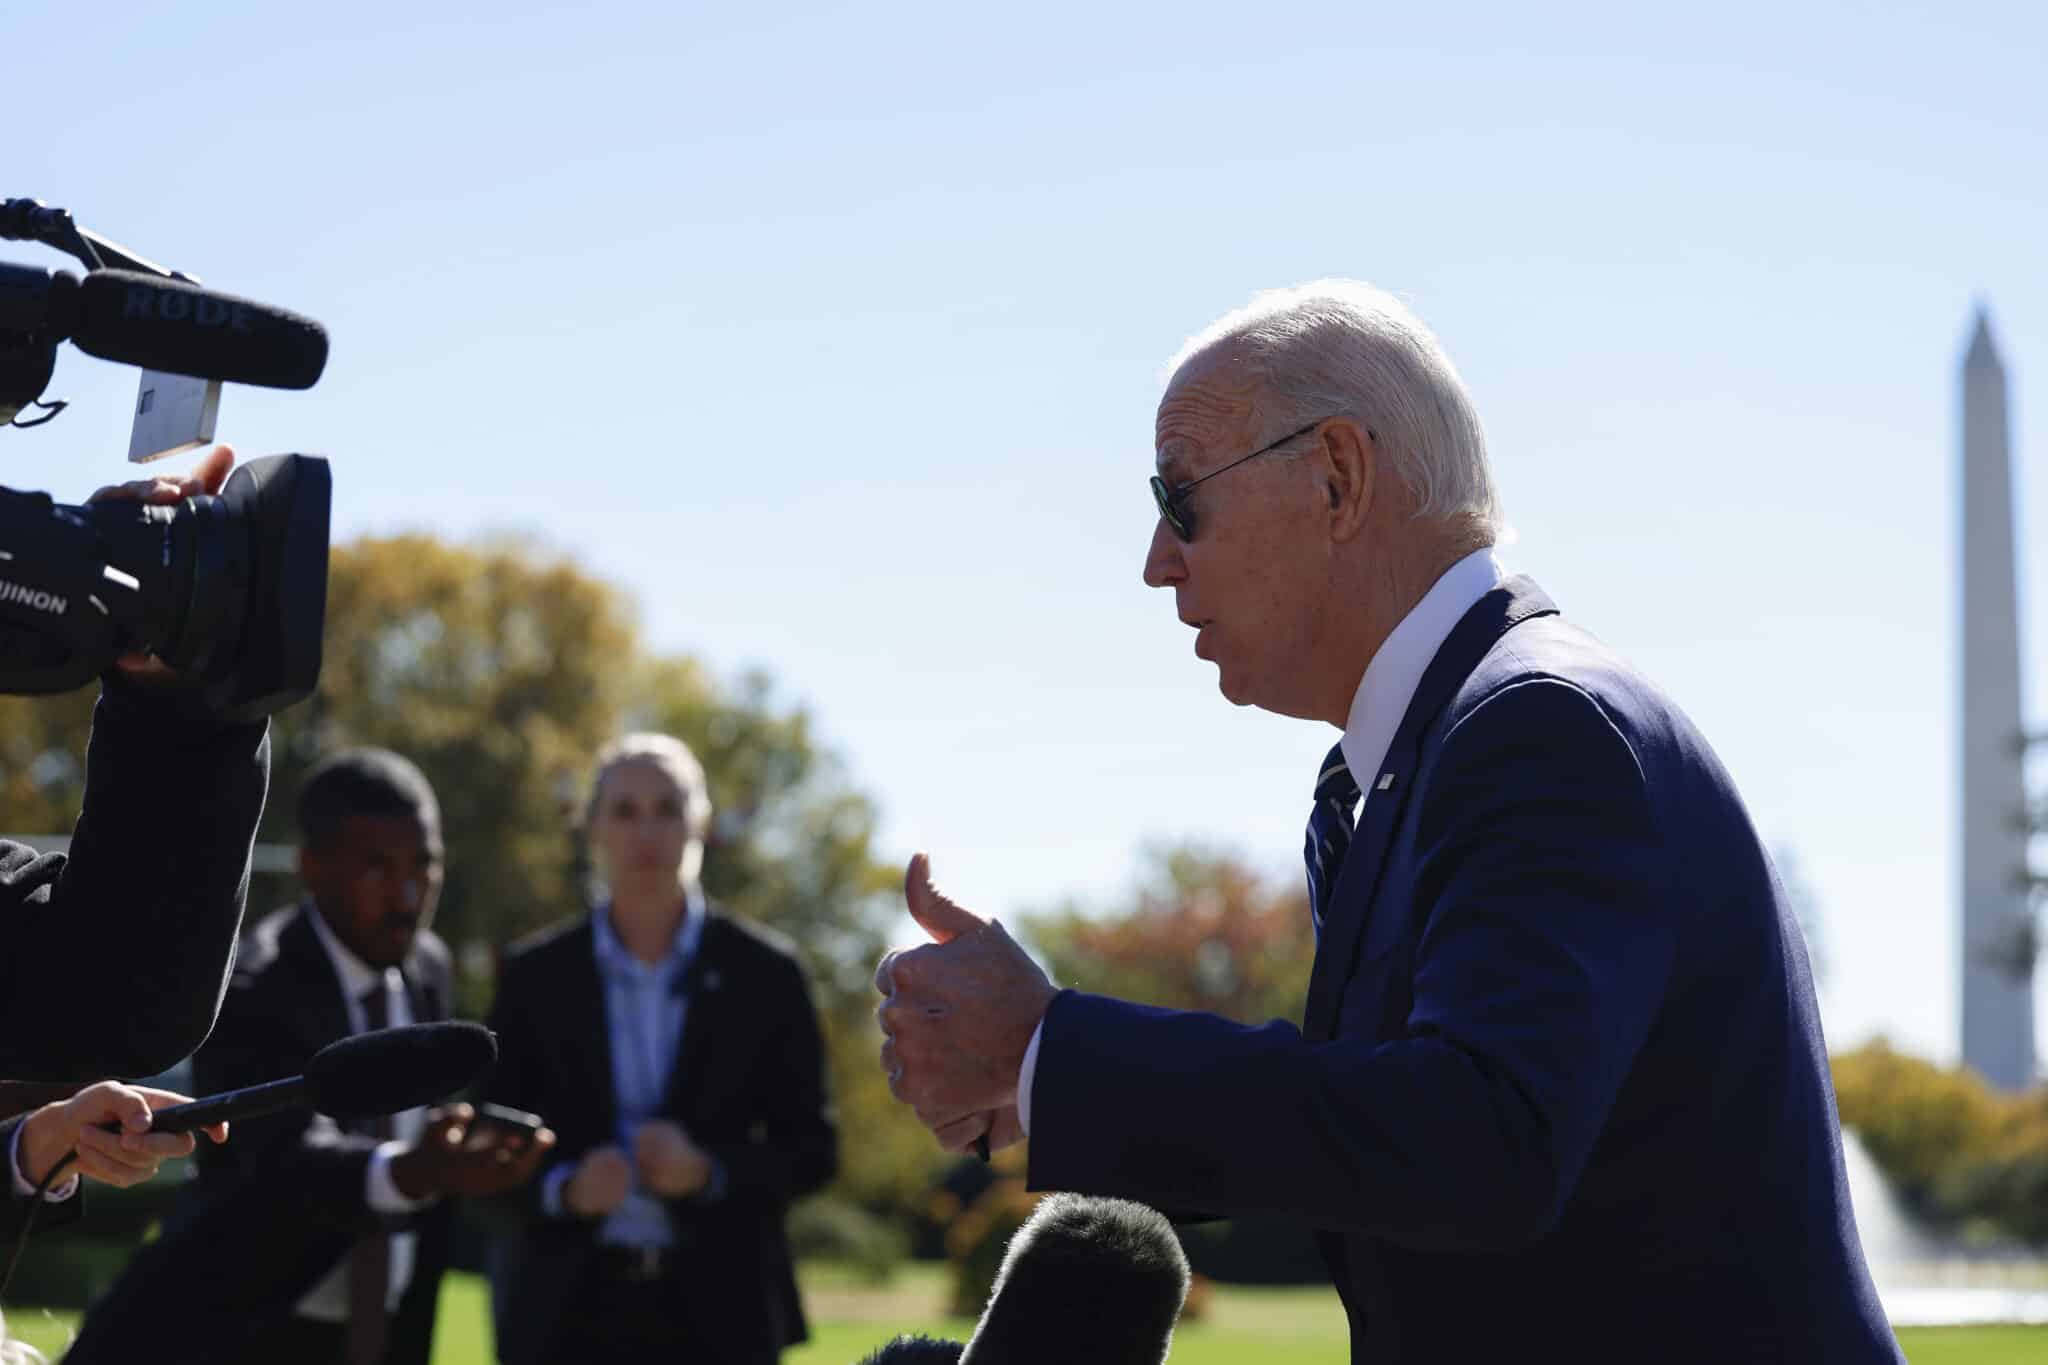 WASHINGTON, DC - OCTOBER 27:  U.S. President Joe Biden speaks to members of the press prior to his Marine One departure from the White House on October 27, 2022 in Washington, DC. Prior to his departure, Biden spoke to reporters about the third quarter GDP growth. Biden is traveling to Syracuse, New York, where he will deliver remarks on the economy and Micron Technology Inc.’s investing in CHIPS manufacturing. (Photo by Anna Moneymaker/Getty Images)